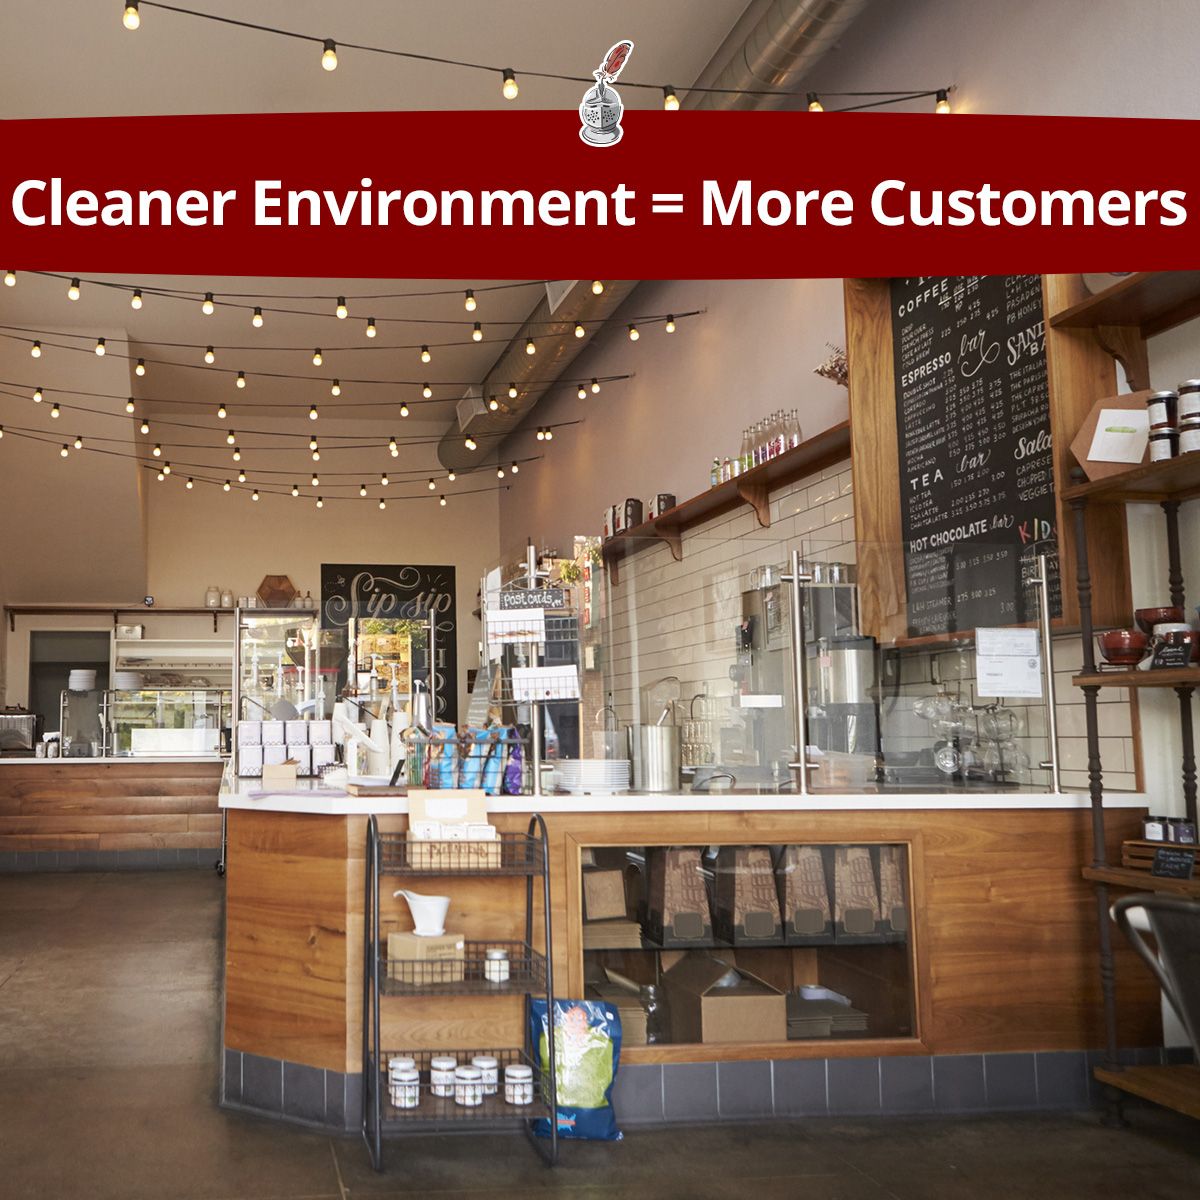 Cleaner Environment = More Customers